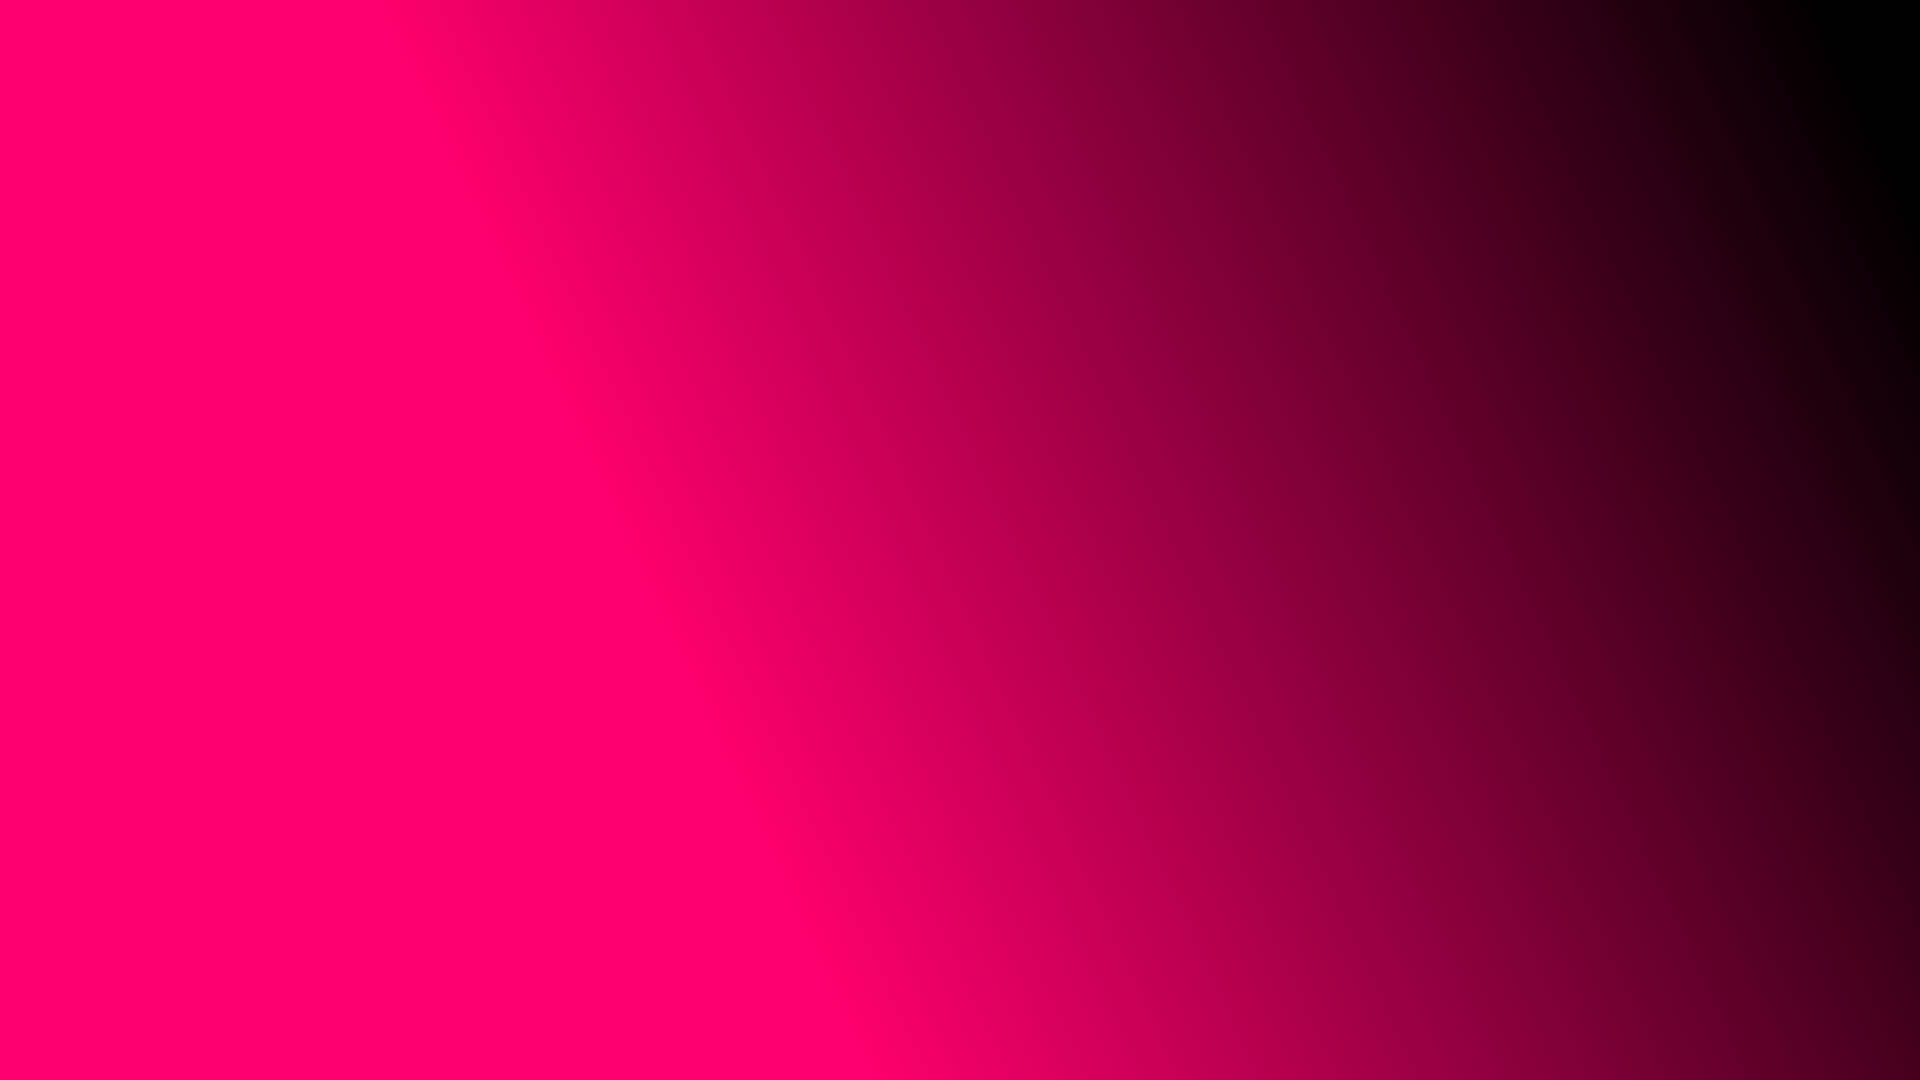 Black And Pink Color Gradient Background